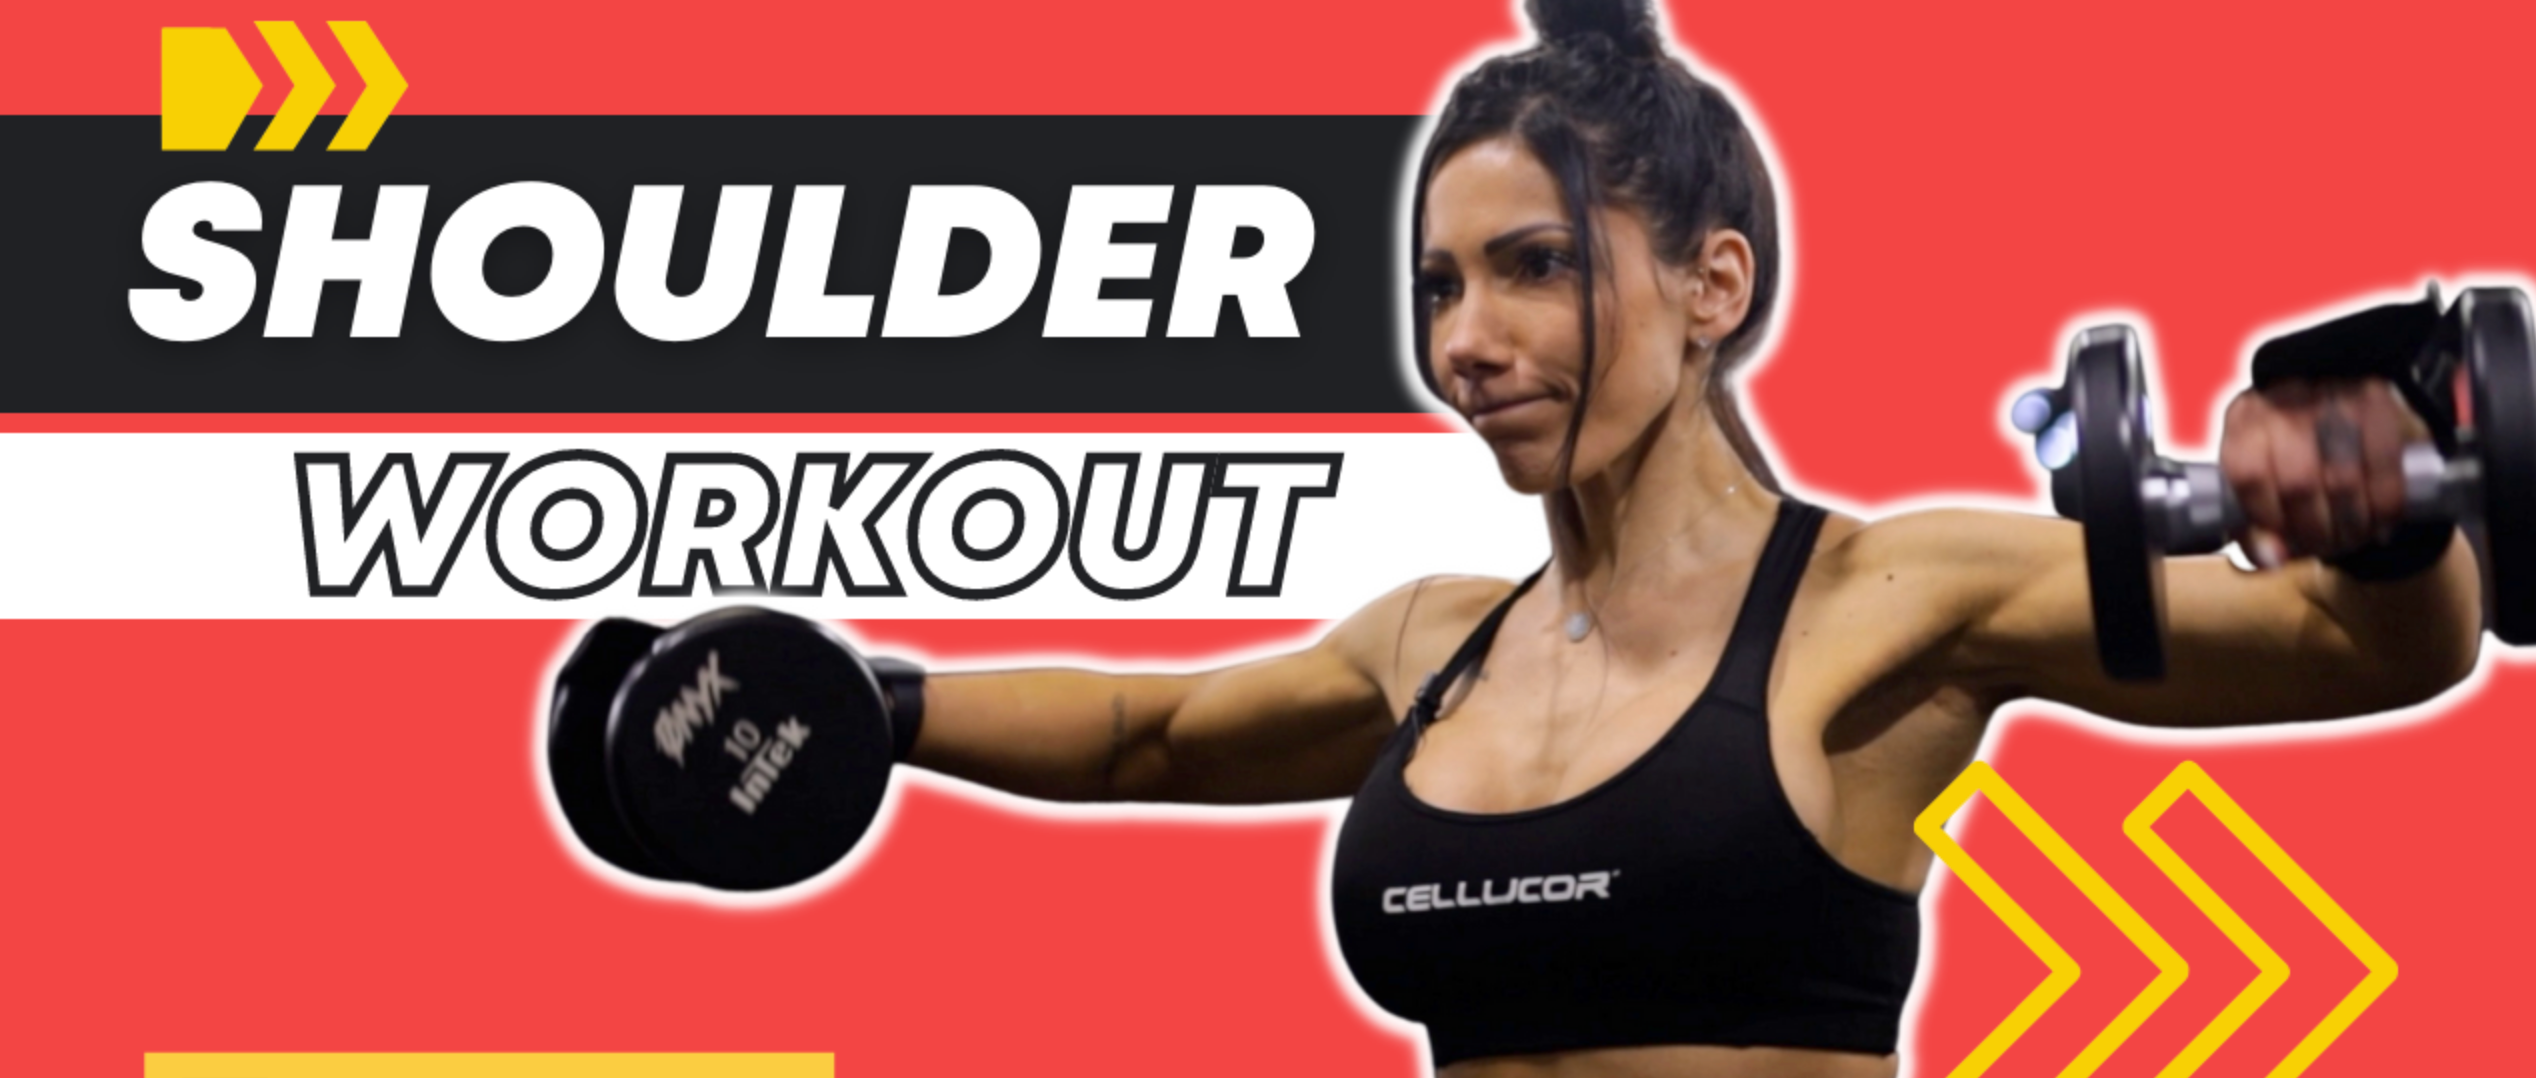 Shoulder Workouts for Women to Try at the Gym | Cellucor